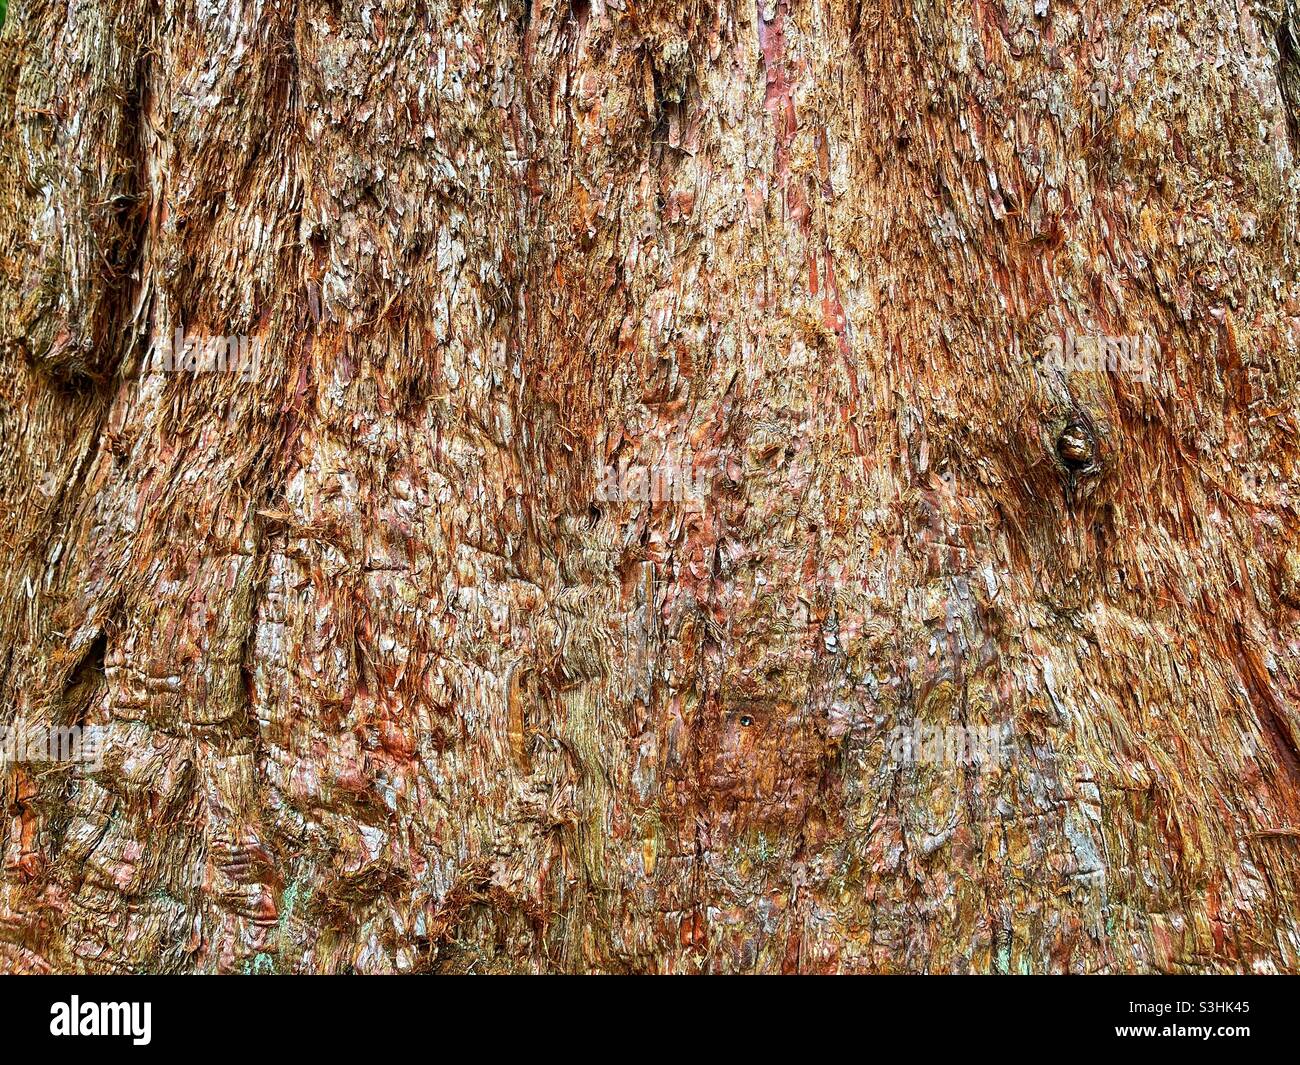 Closeup view of the bark of a giant redwood tree. No people. Copy space. Stock Photo